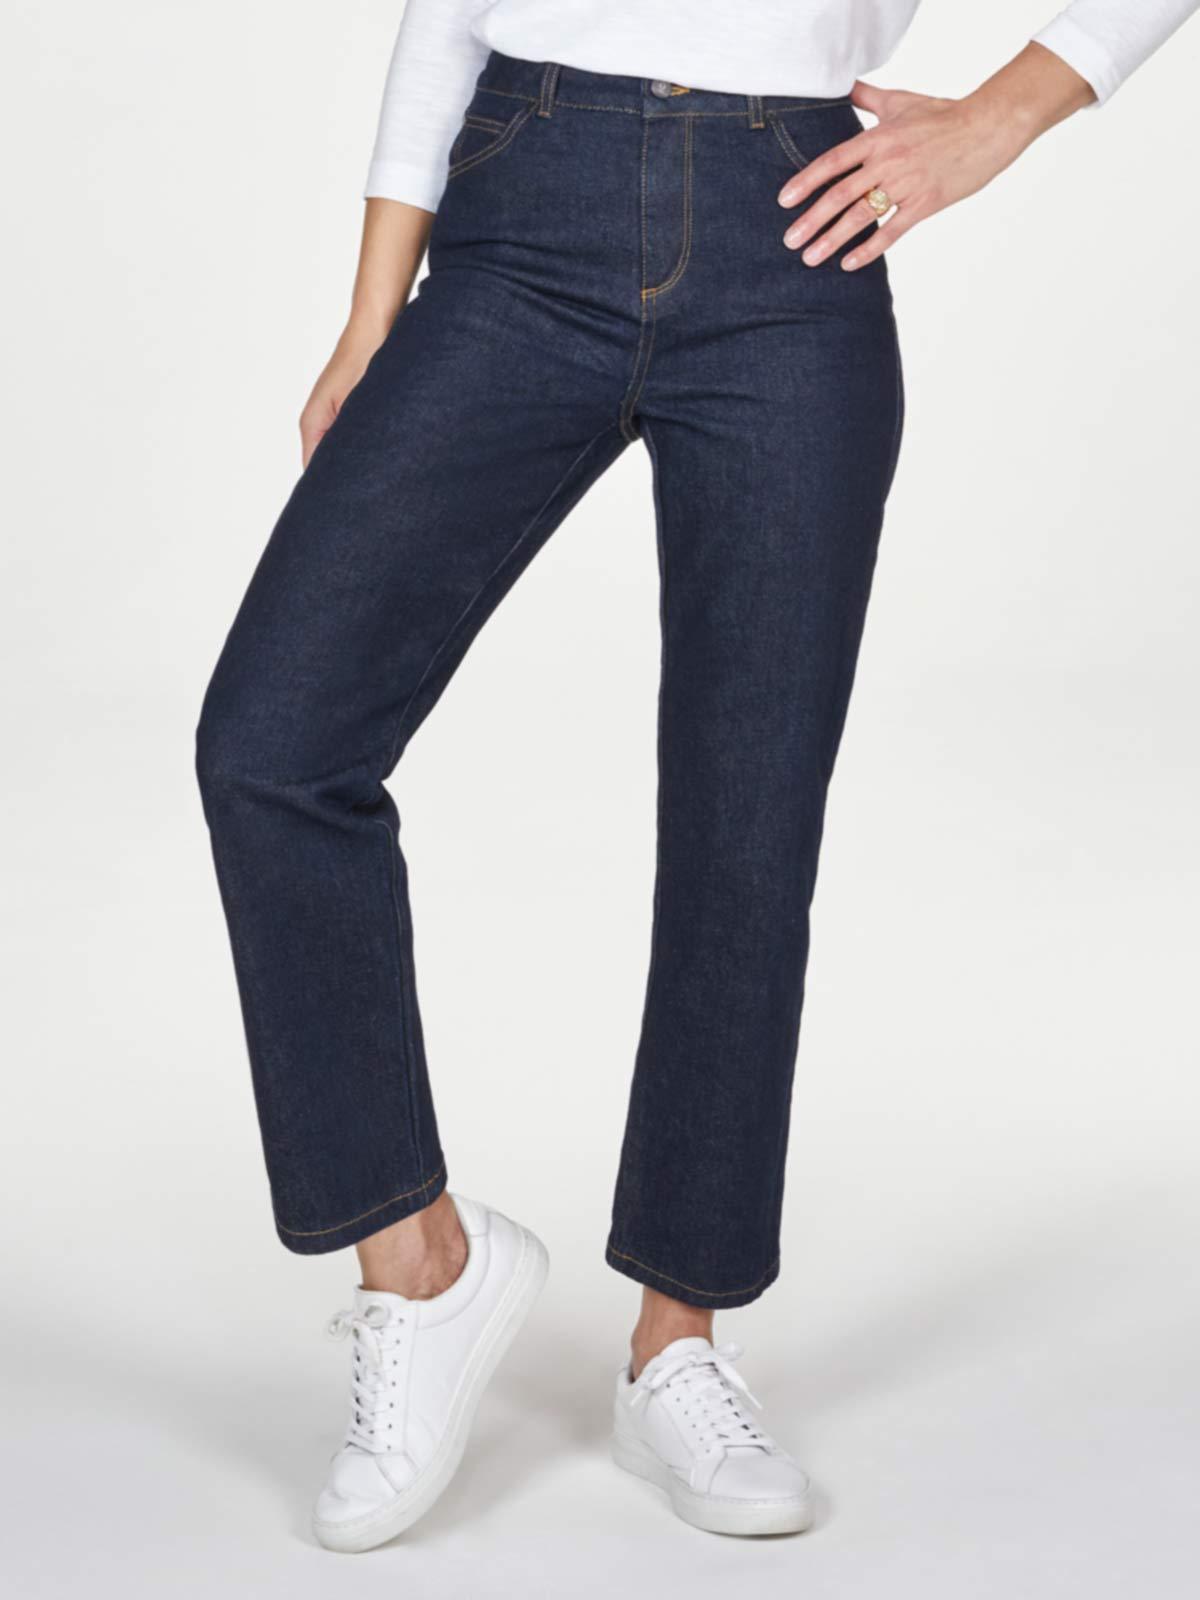 Essential GOTS Organic Cotton Slim Jeans - Thought Clothing UK